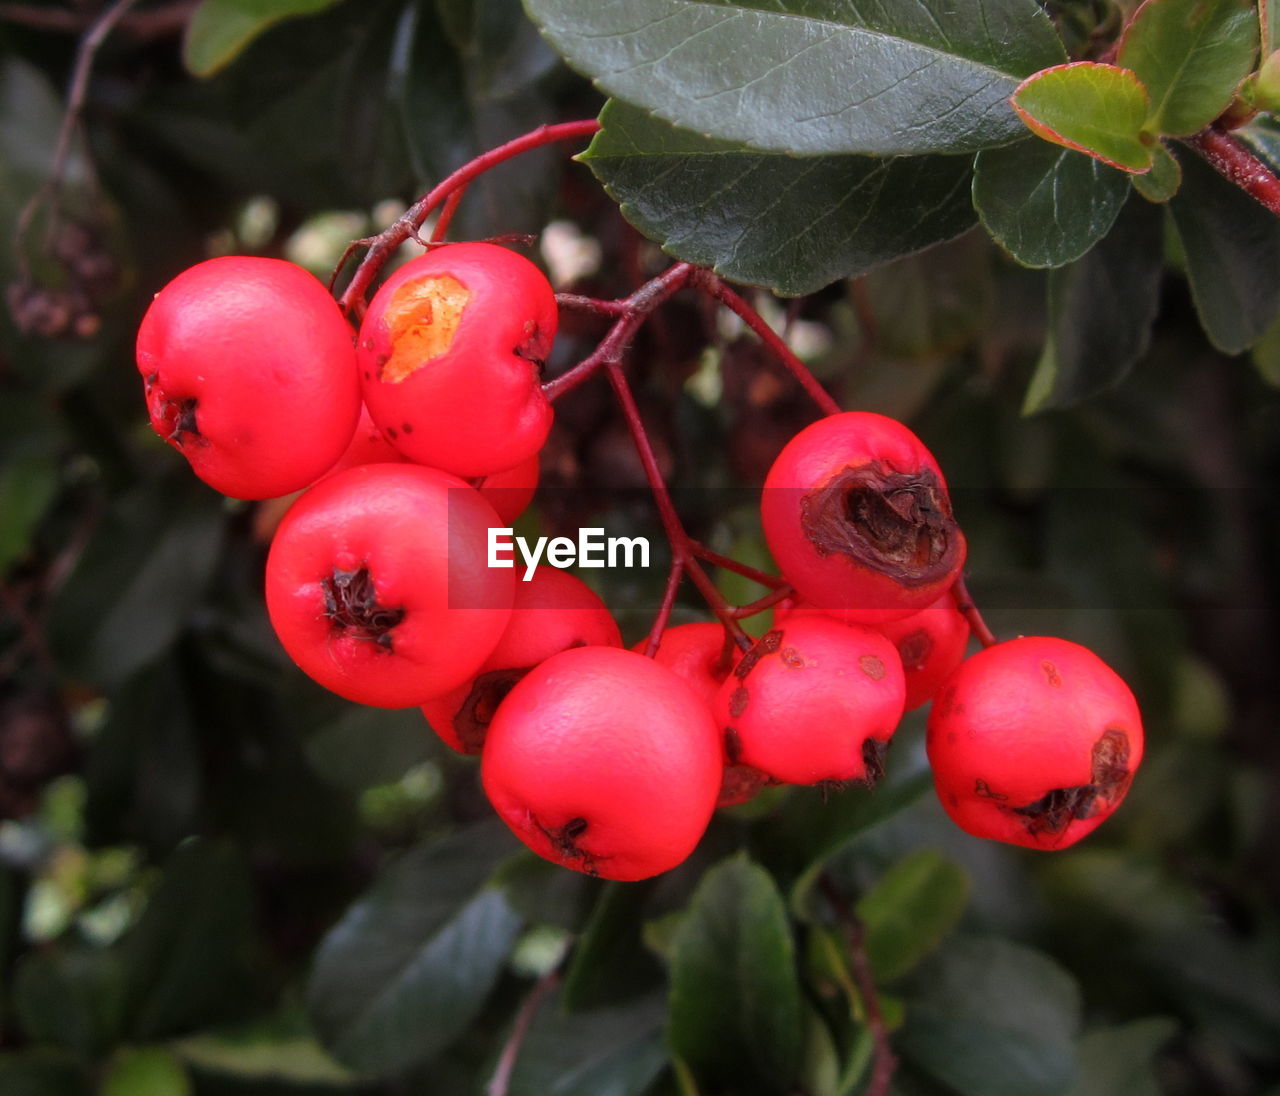 food, food and drink, healthy eating, fruit, red, plant, leaf, plant part, flower, freshness, tree, growth, nature, wellbeing, close-up, shrub, produce, no people, rose hip, berry, agriculture, outdoors, ripe, focus on foreground, day, branch, organic, hanging